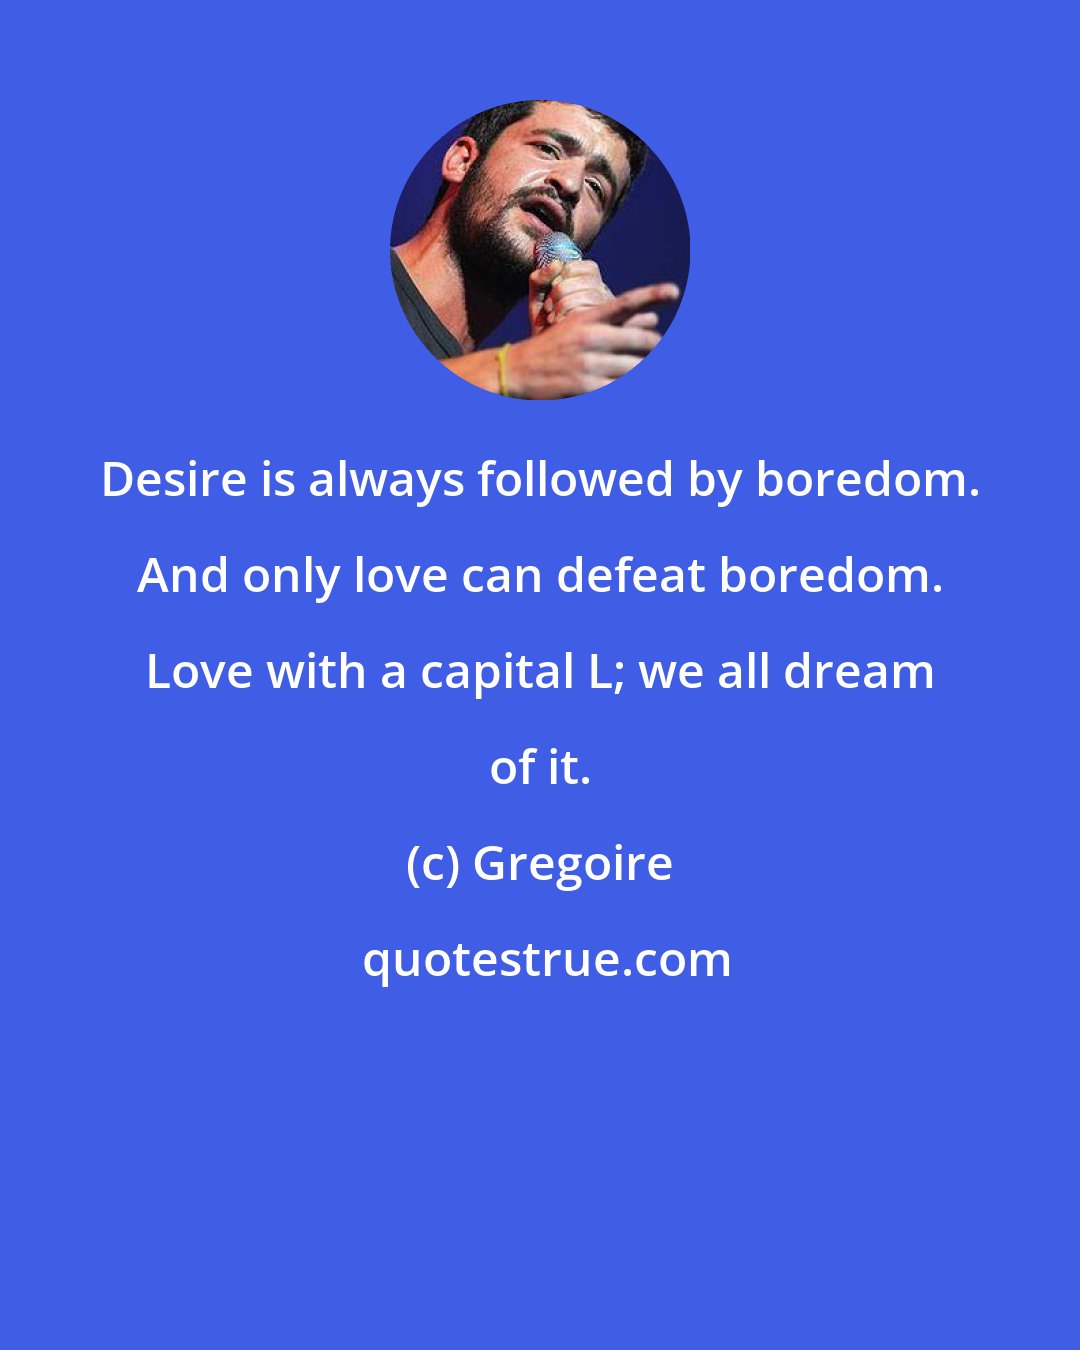 Gregoire: Desire is always followed by boredom. And only love can defeat boredom. Love with a capital L; we all dream of it.